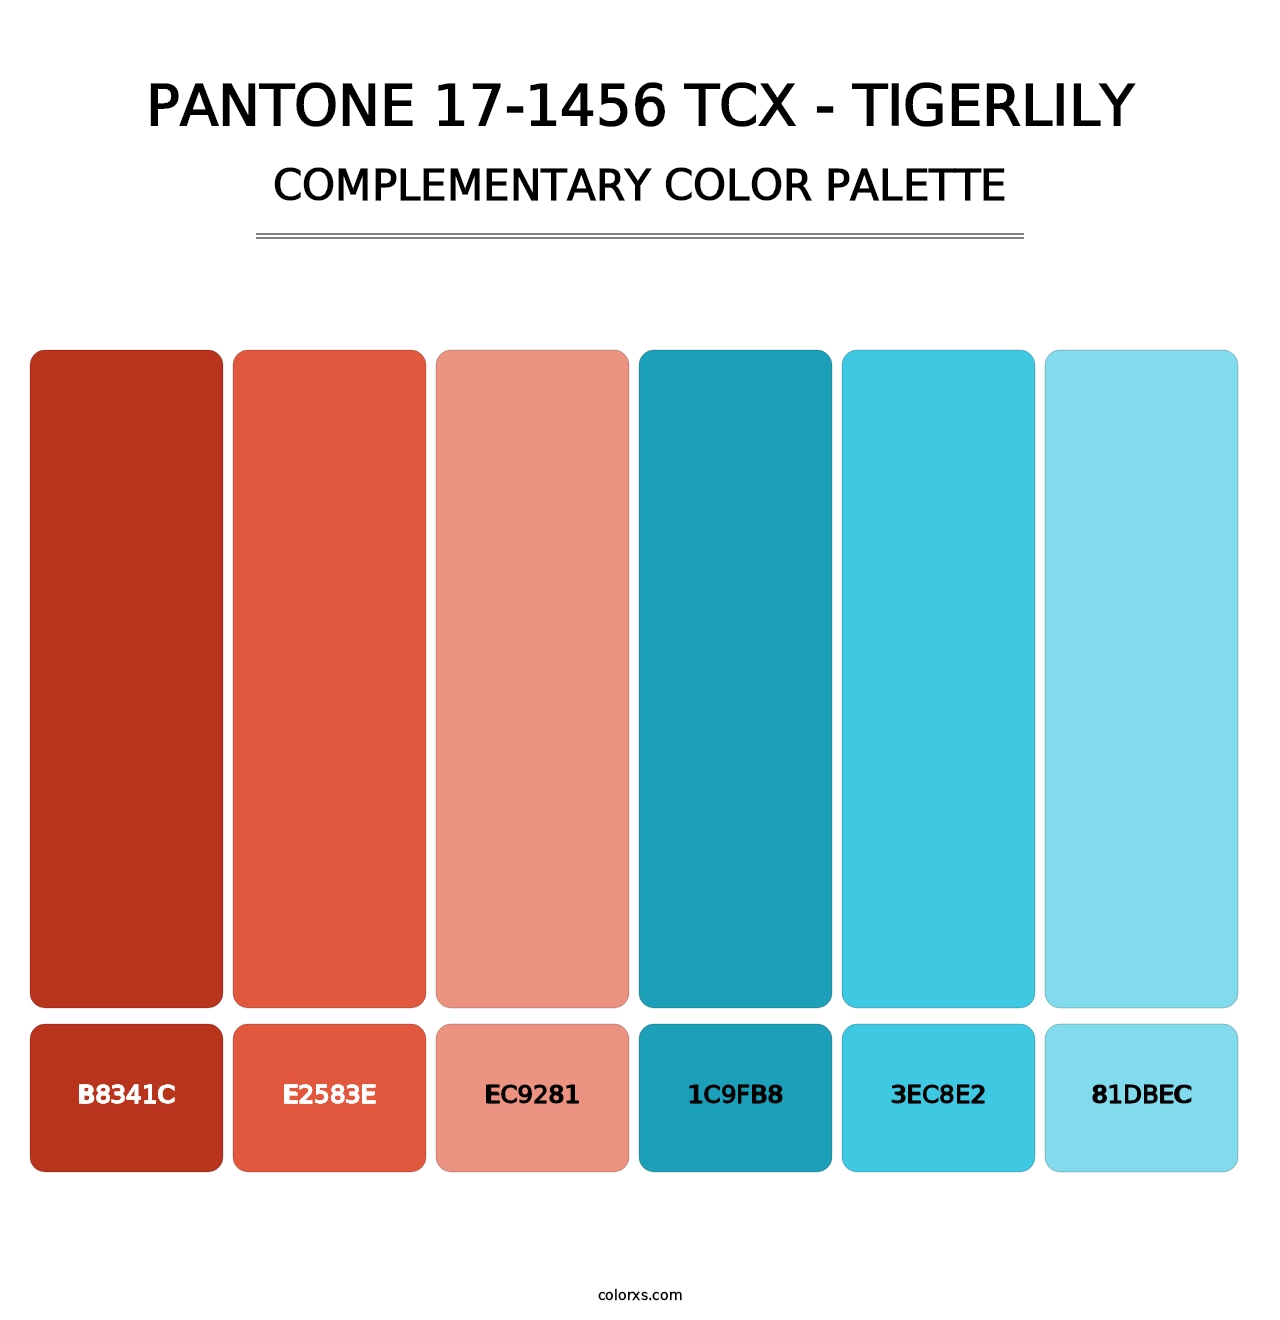 PANTONE 17-1456 TCX - Tigerlily - Complementary Color Palette